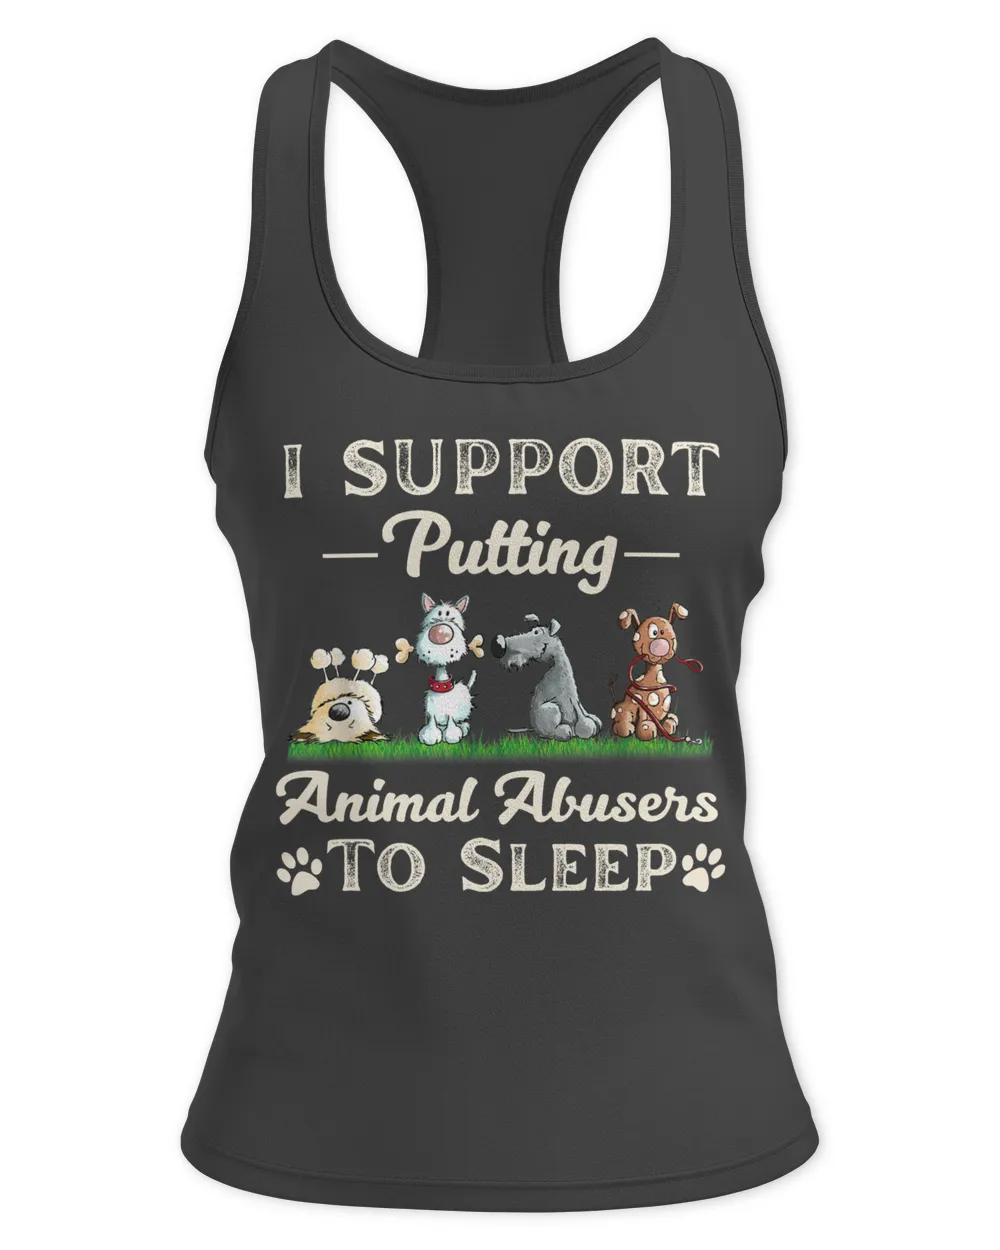 I Support Putting Animal Abusers